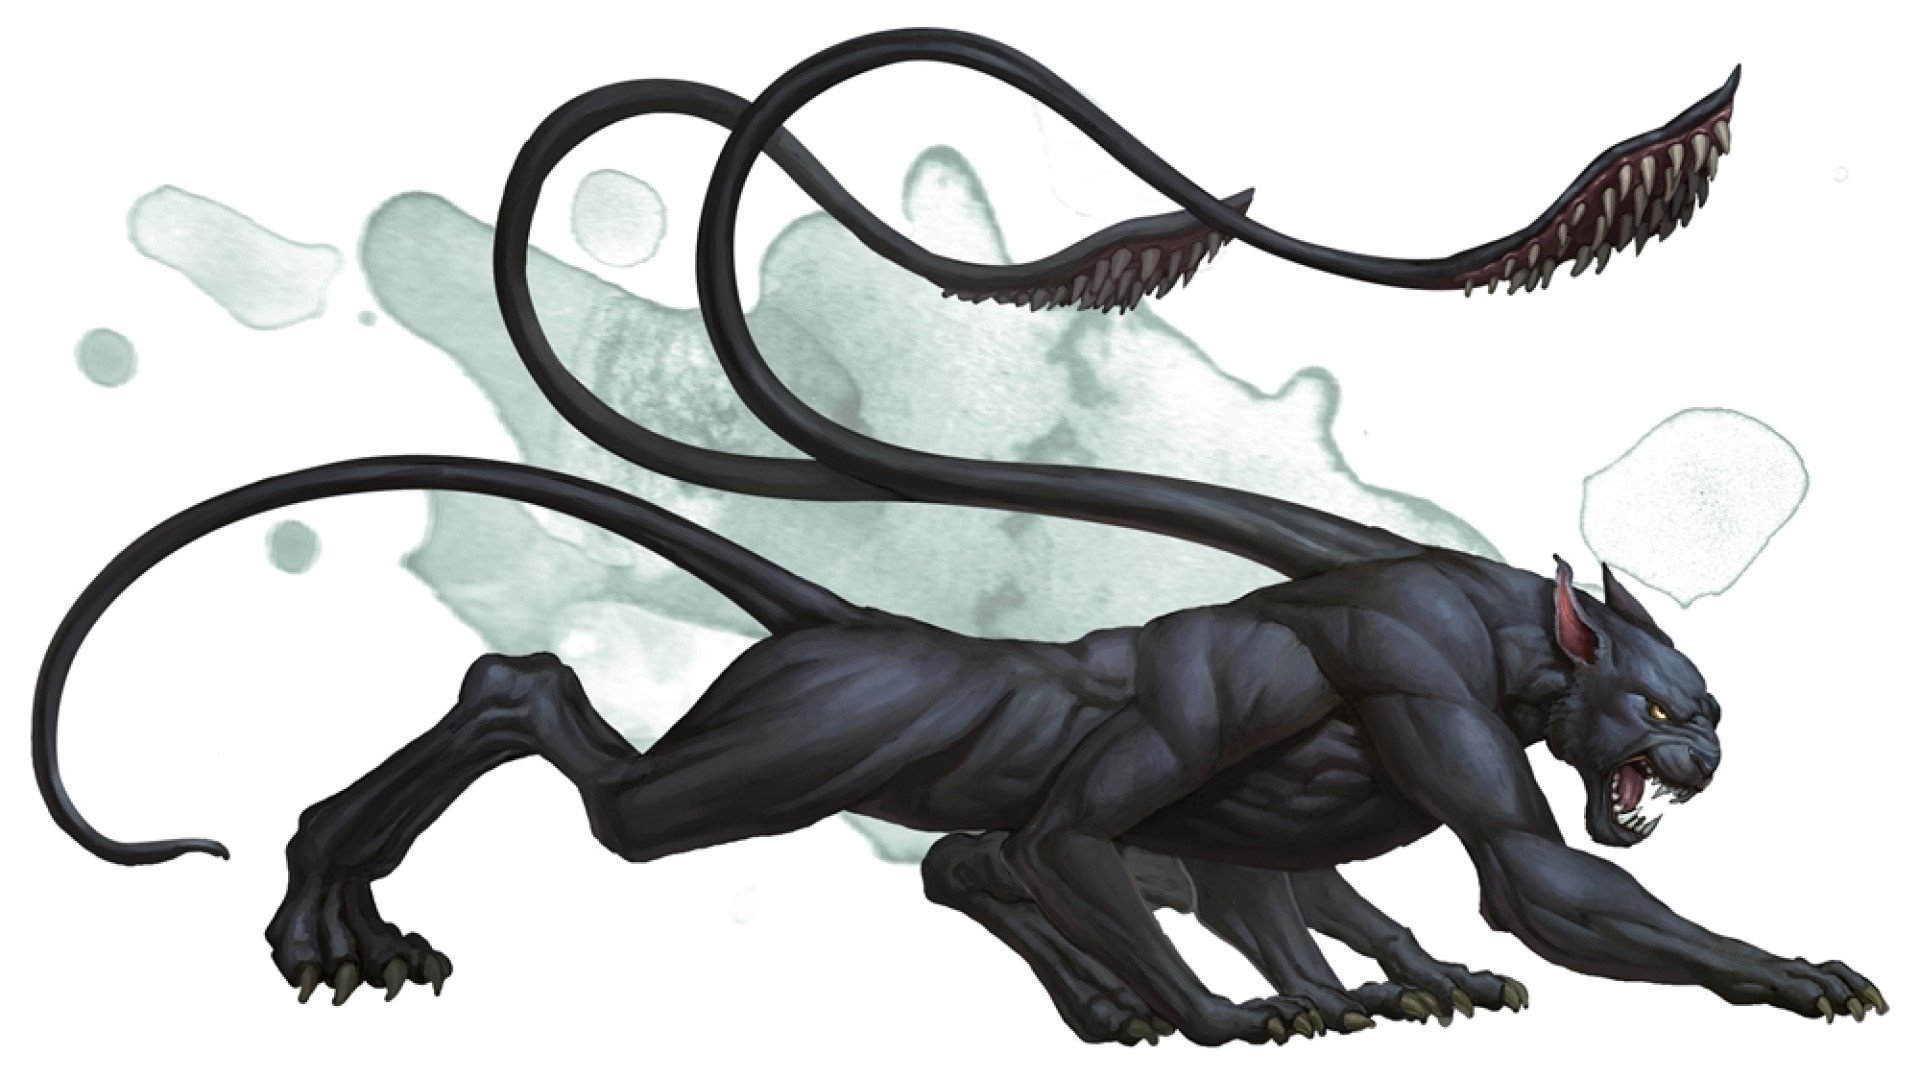 DnD Displacer Beast 5e (art by Wizards of the Coast)